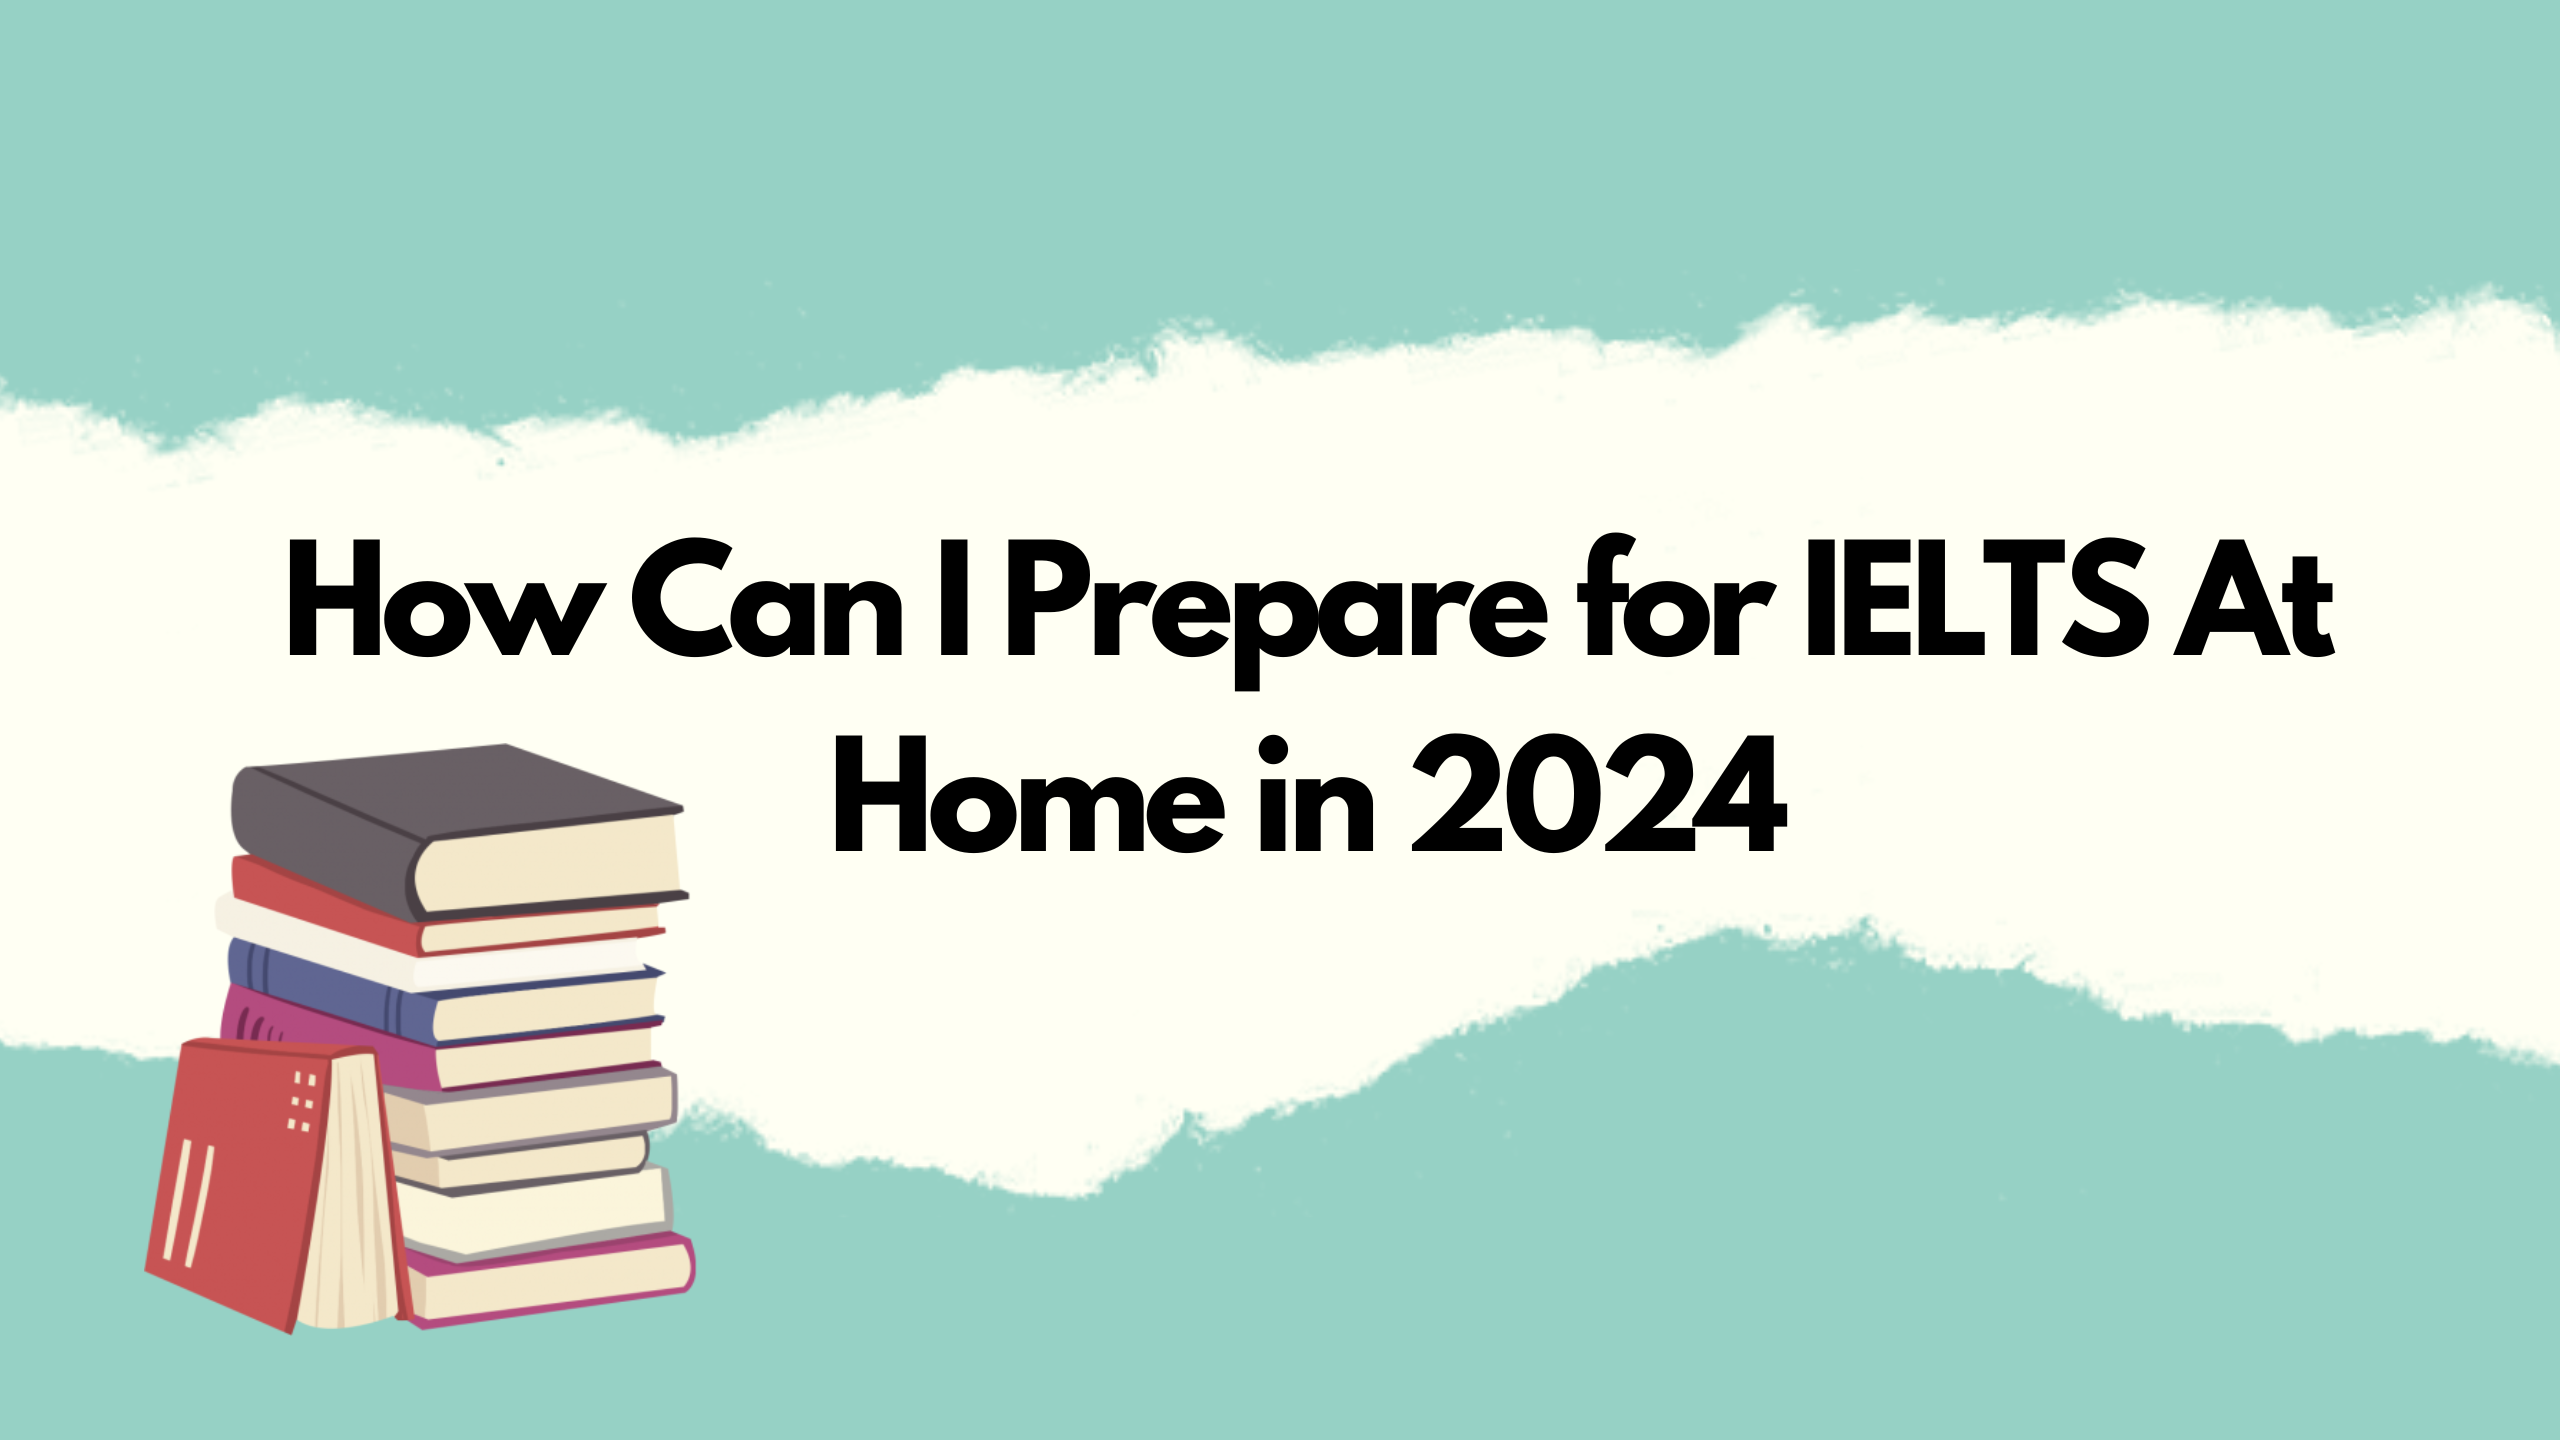 How Can I Prepare for IELTS At Home in 2024